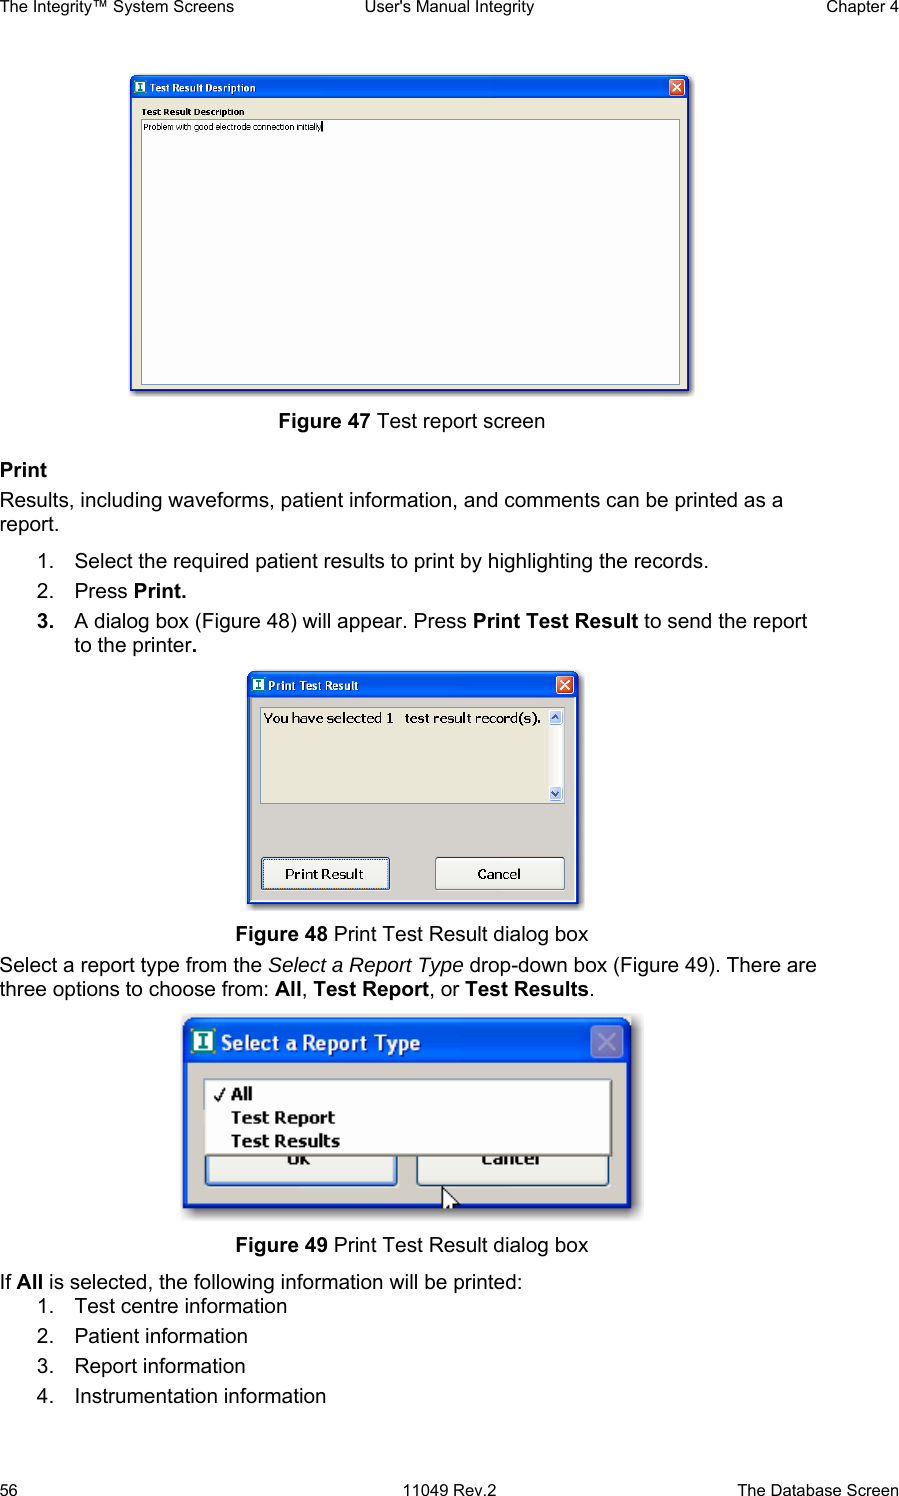 The Integrity™ System Screens  User&apos;s Manual Integrity  Chapter 4  56  11049 Rev.2  The Database Screen  Figure 47 Test report screen Print Results, including waveforms, patient information, and comments can be printed as a report. 1.  Select the required patient results to print by highlighting the records. 2. Press Print. 3.  A dialog box (Figure 48) will appear. Press Print Test Result to send the report to the printer.   Figure 48 Print Test Result dialog box Select a report type from the Select a Report Type drop-down box (Figure 49). There are three options to choose from: All, Test Report, or Test Results.  Figure 49 Print Test Result dialog box If All is selected, the following information will be printed: 1.  Test centre information 2. Patient information 3.  Report information  4. Instrumentation information 